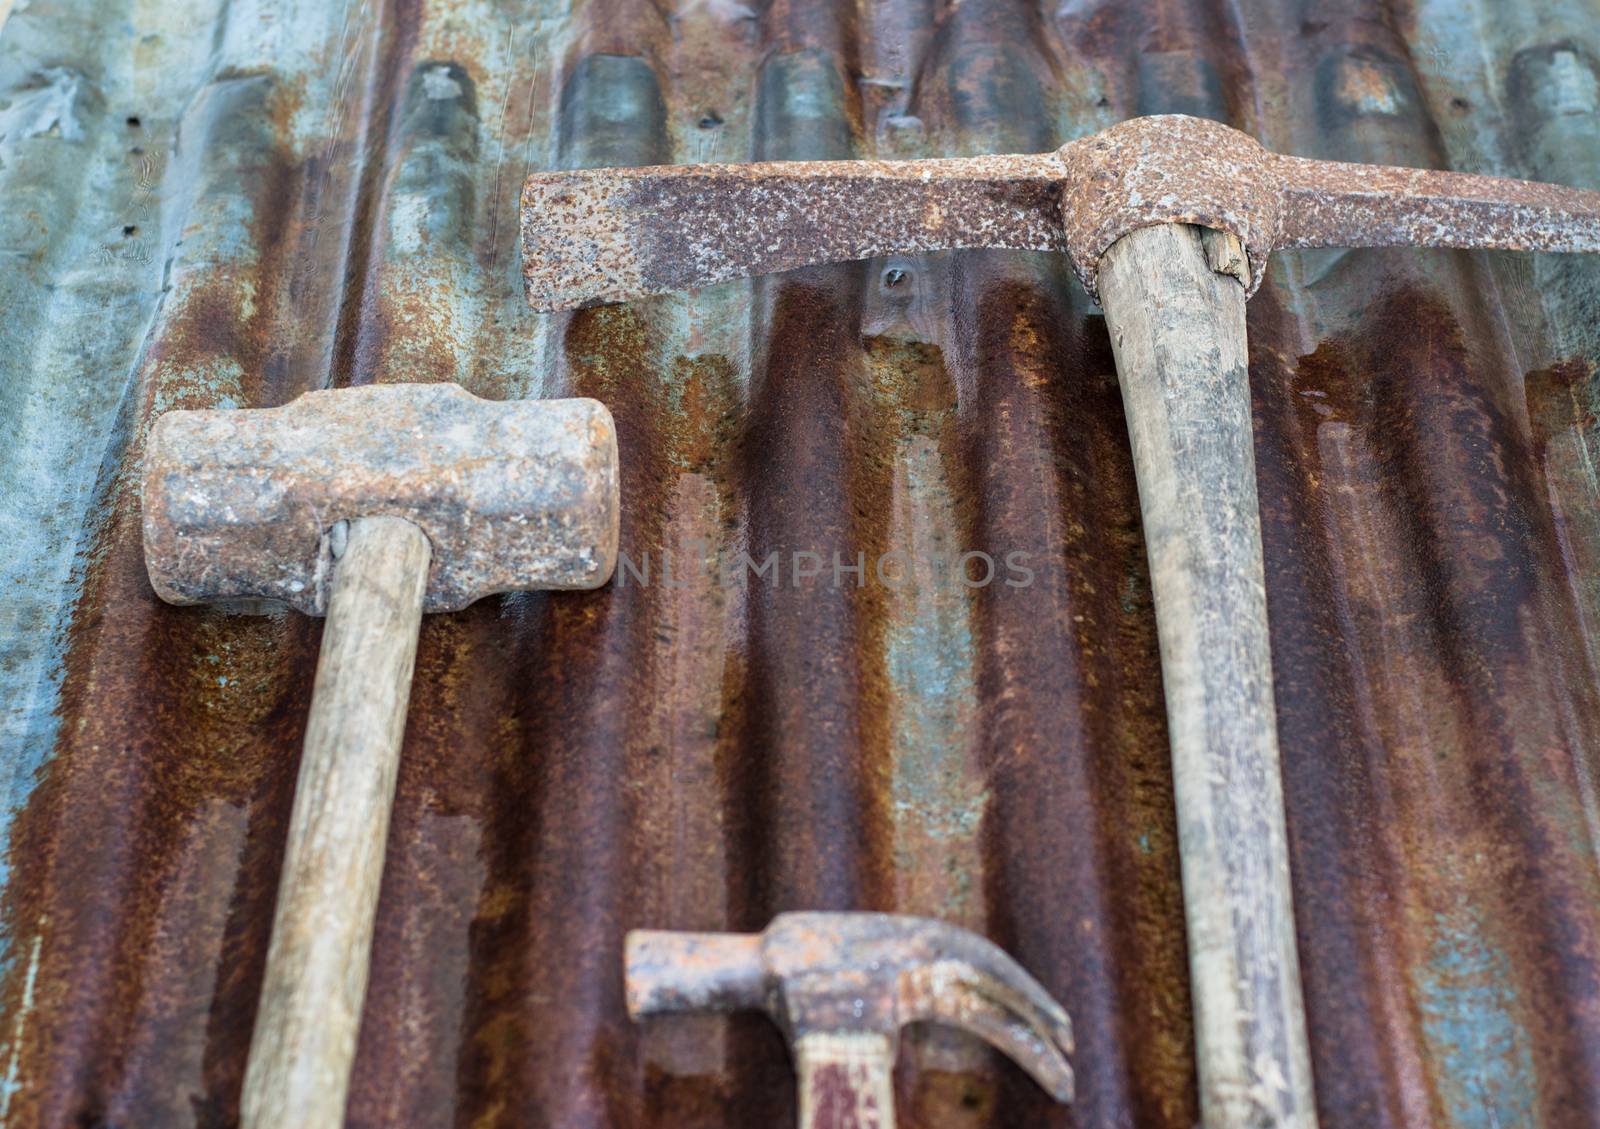 Hammers on zinc background by metal22